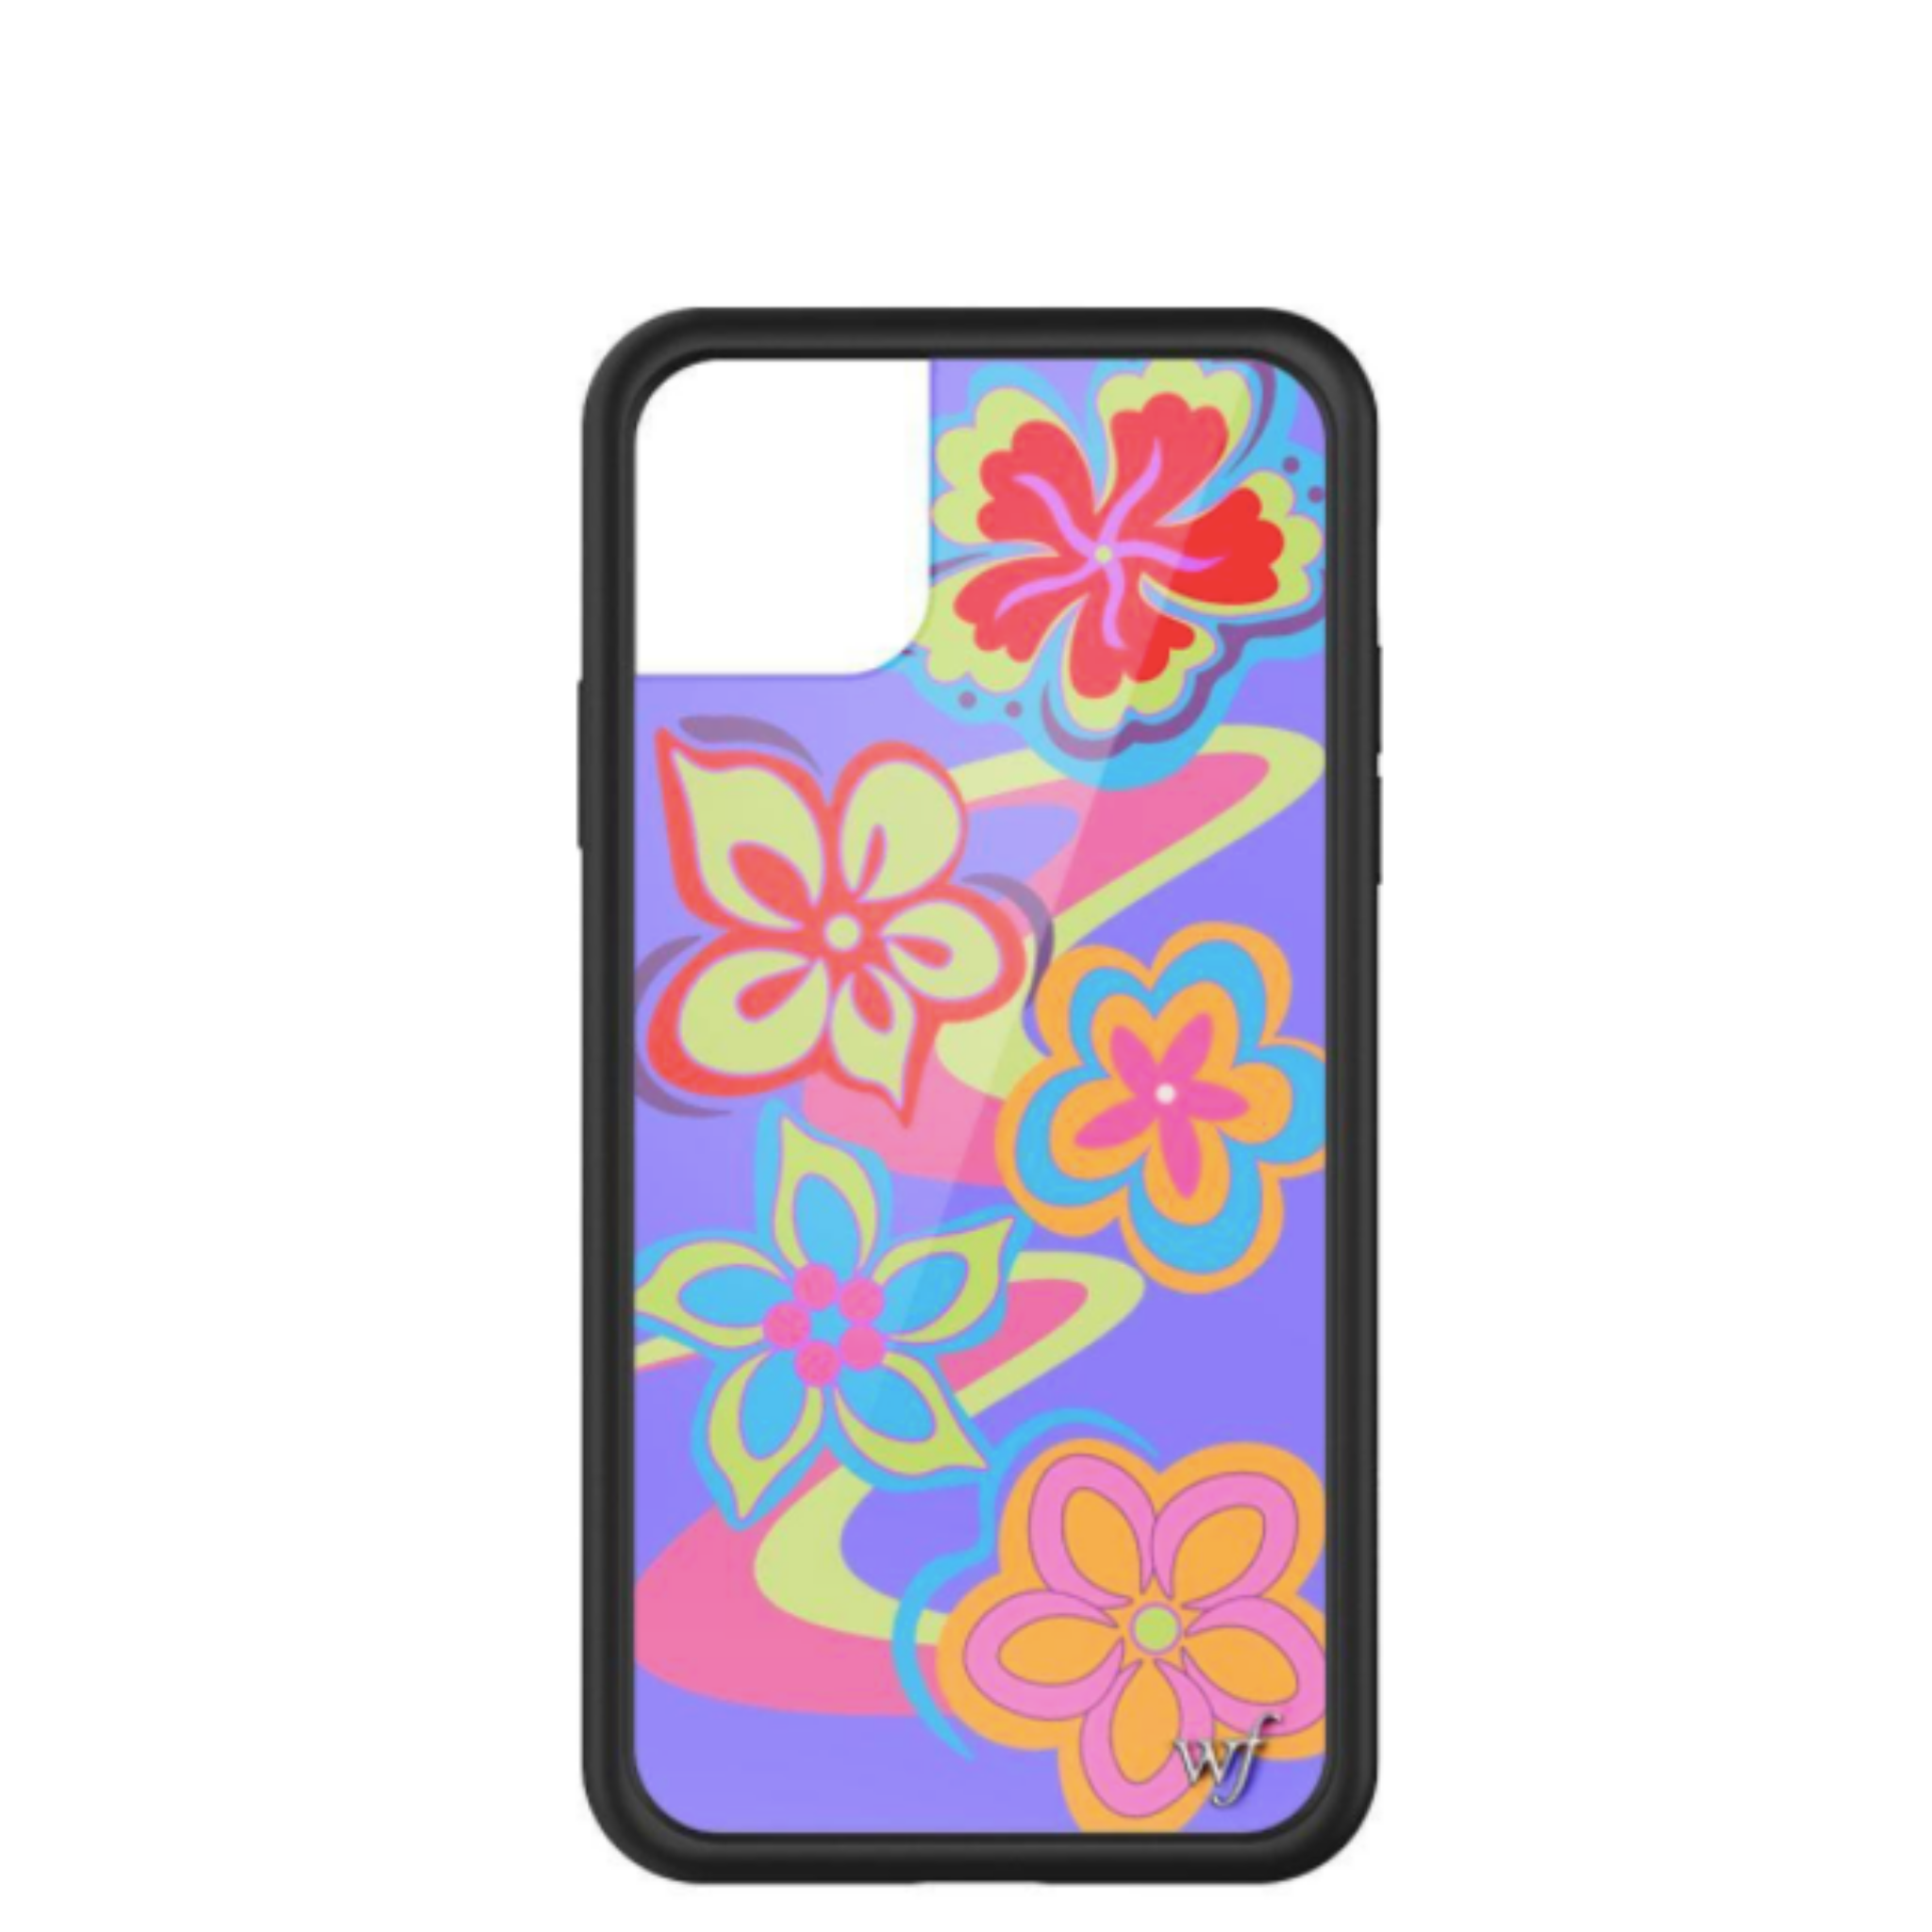 Surf's Up iPhone 11 Pro Max Case